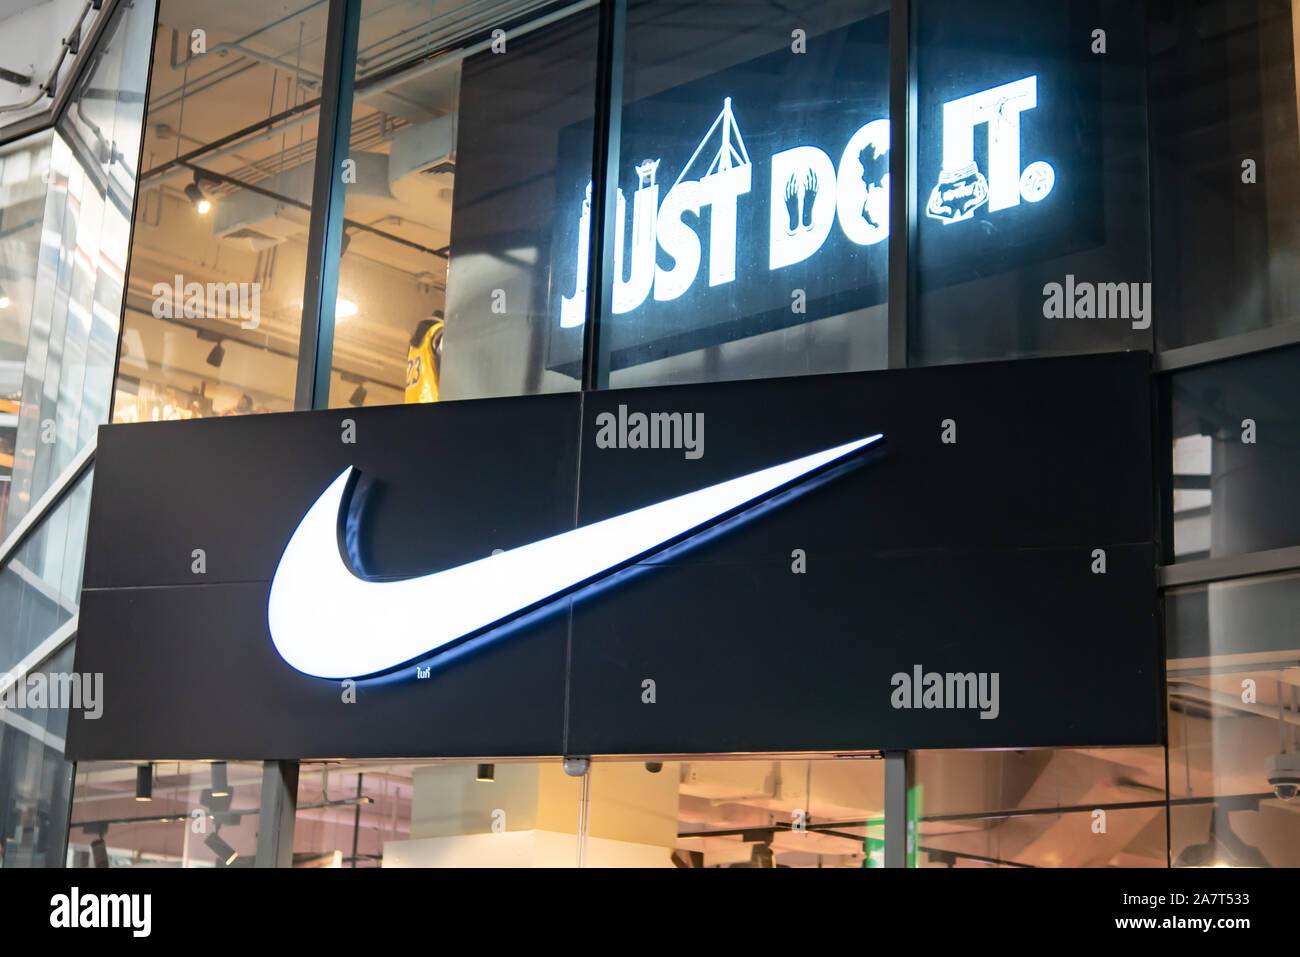 Just do it nike logo High Resolution Stock Photography and Images - Alamy